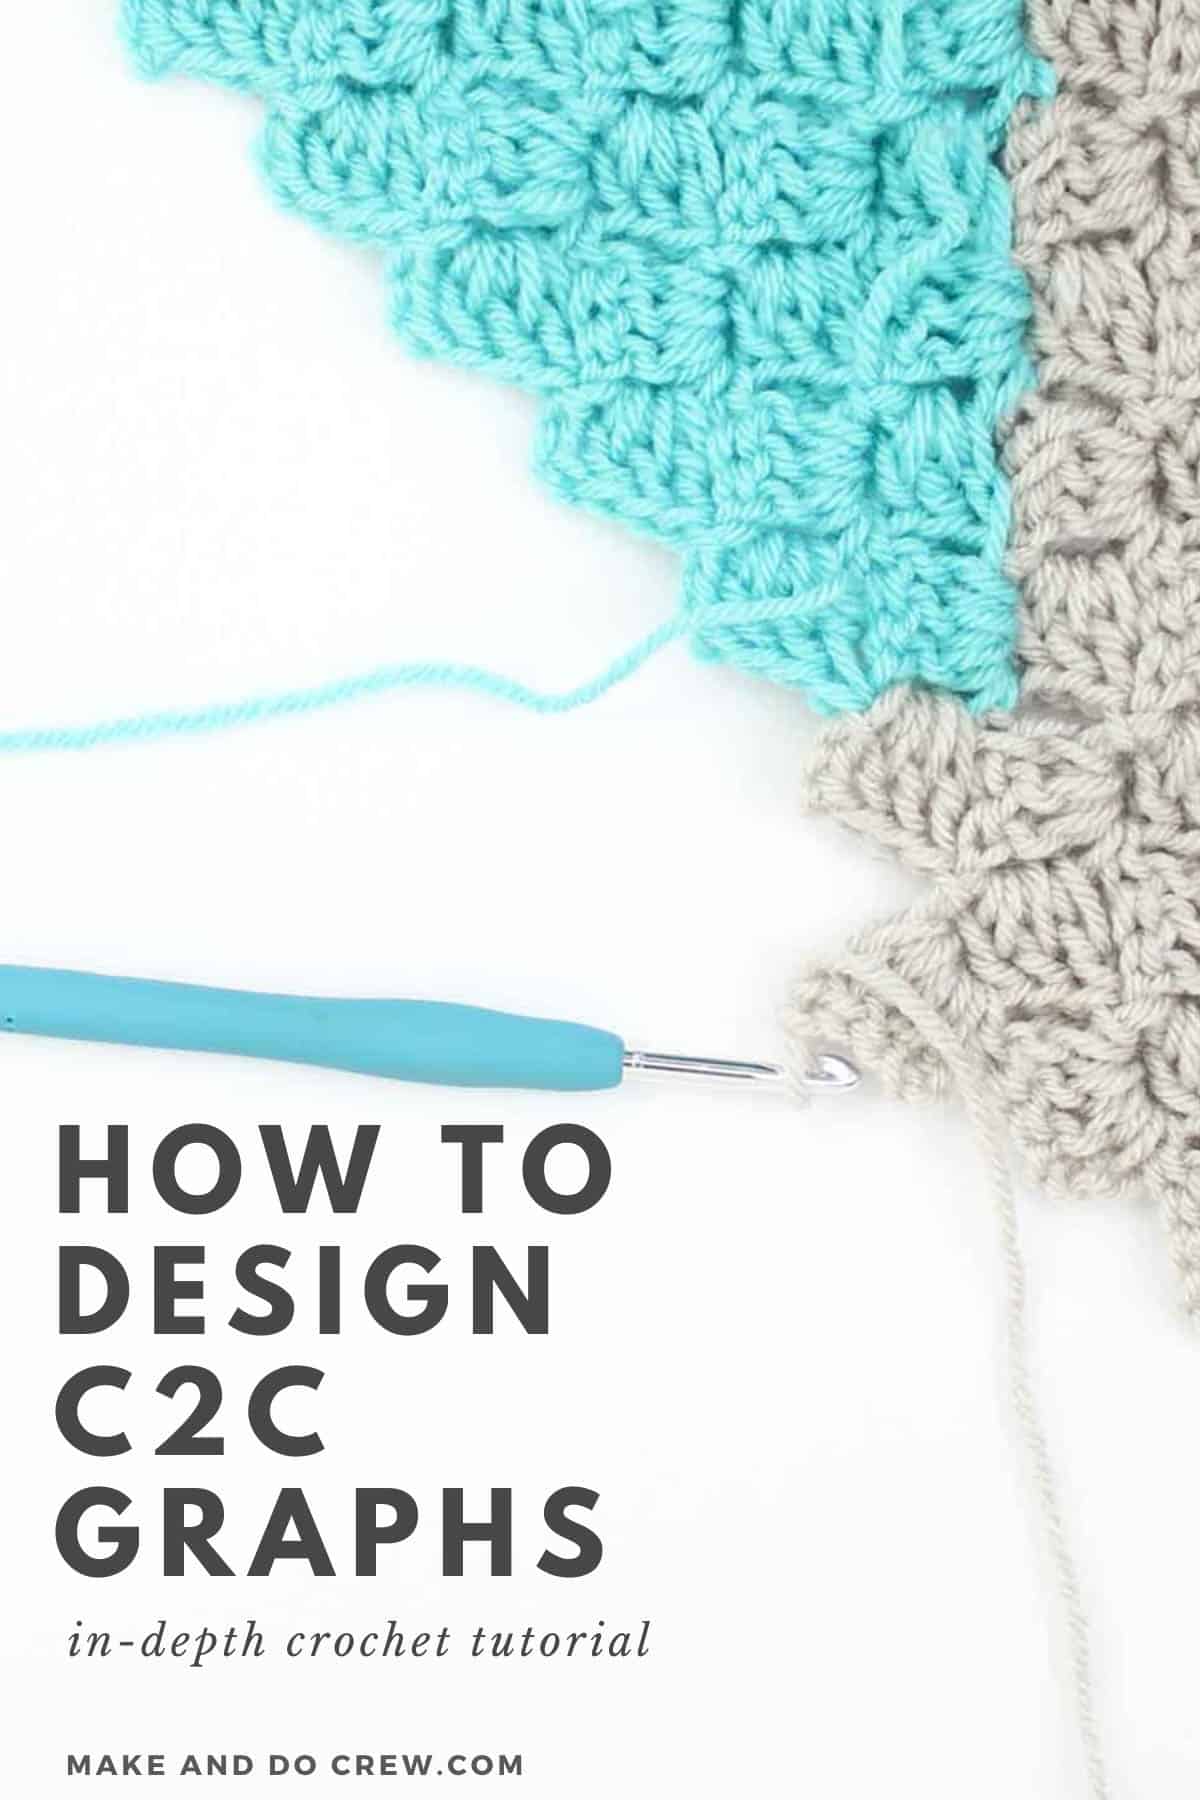 The Easiest Way To Design Your Own C2c Crochet Graph Patterns Step By Step Tutorial,Best Sheets To Buy